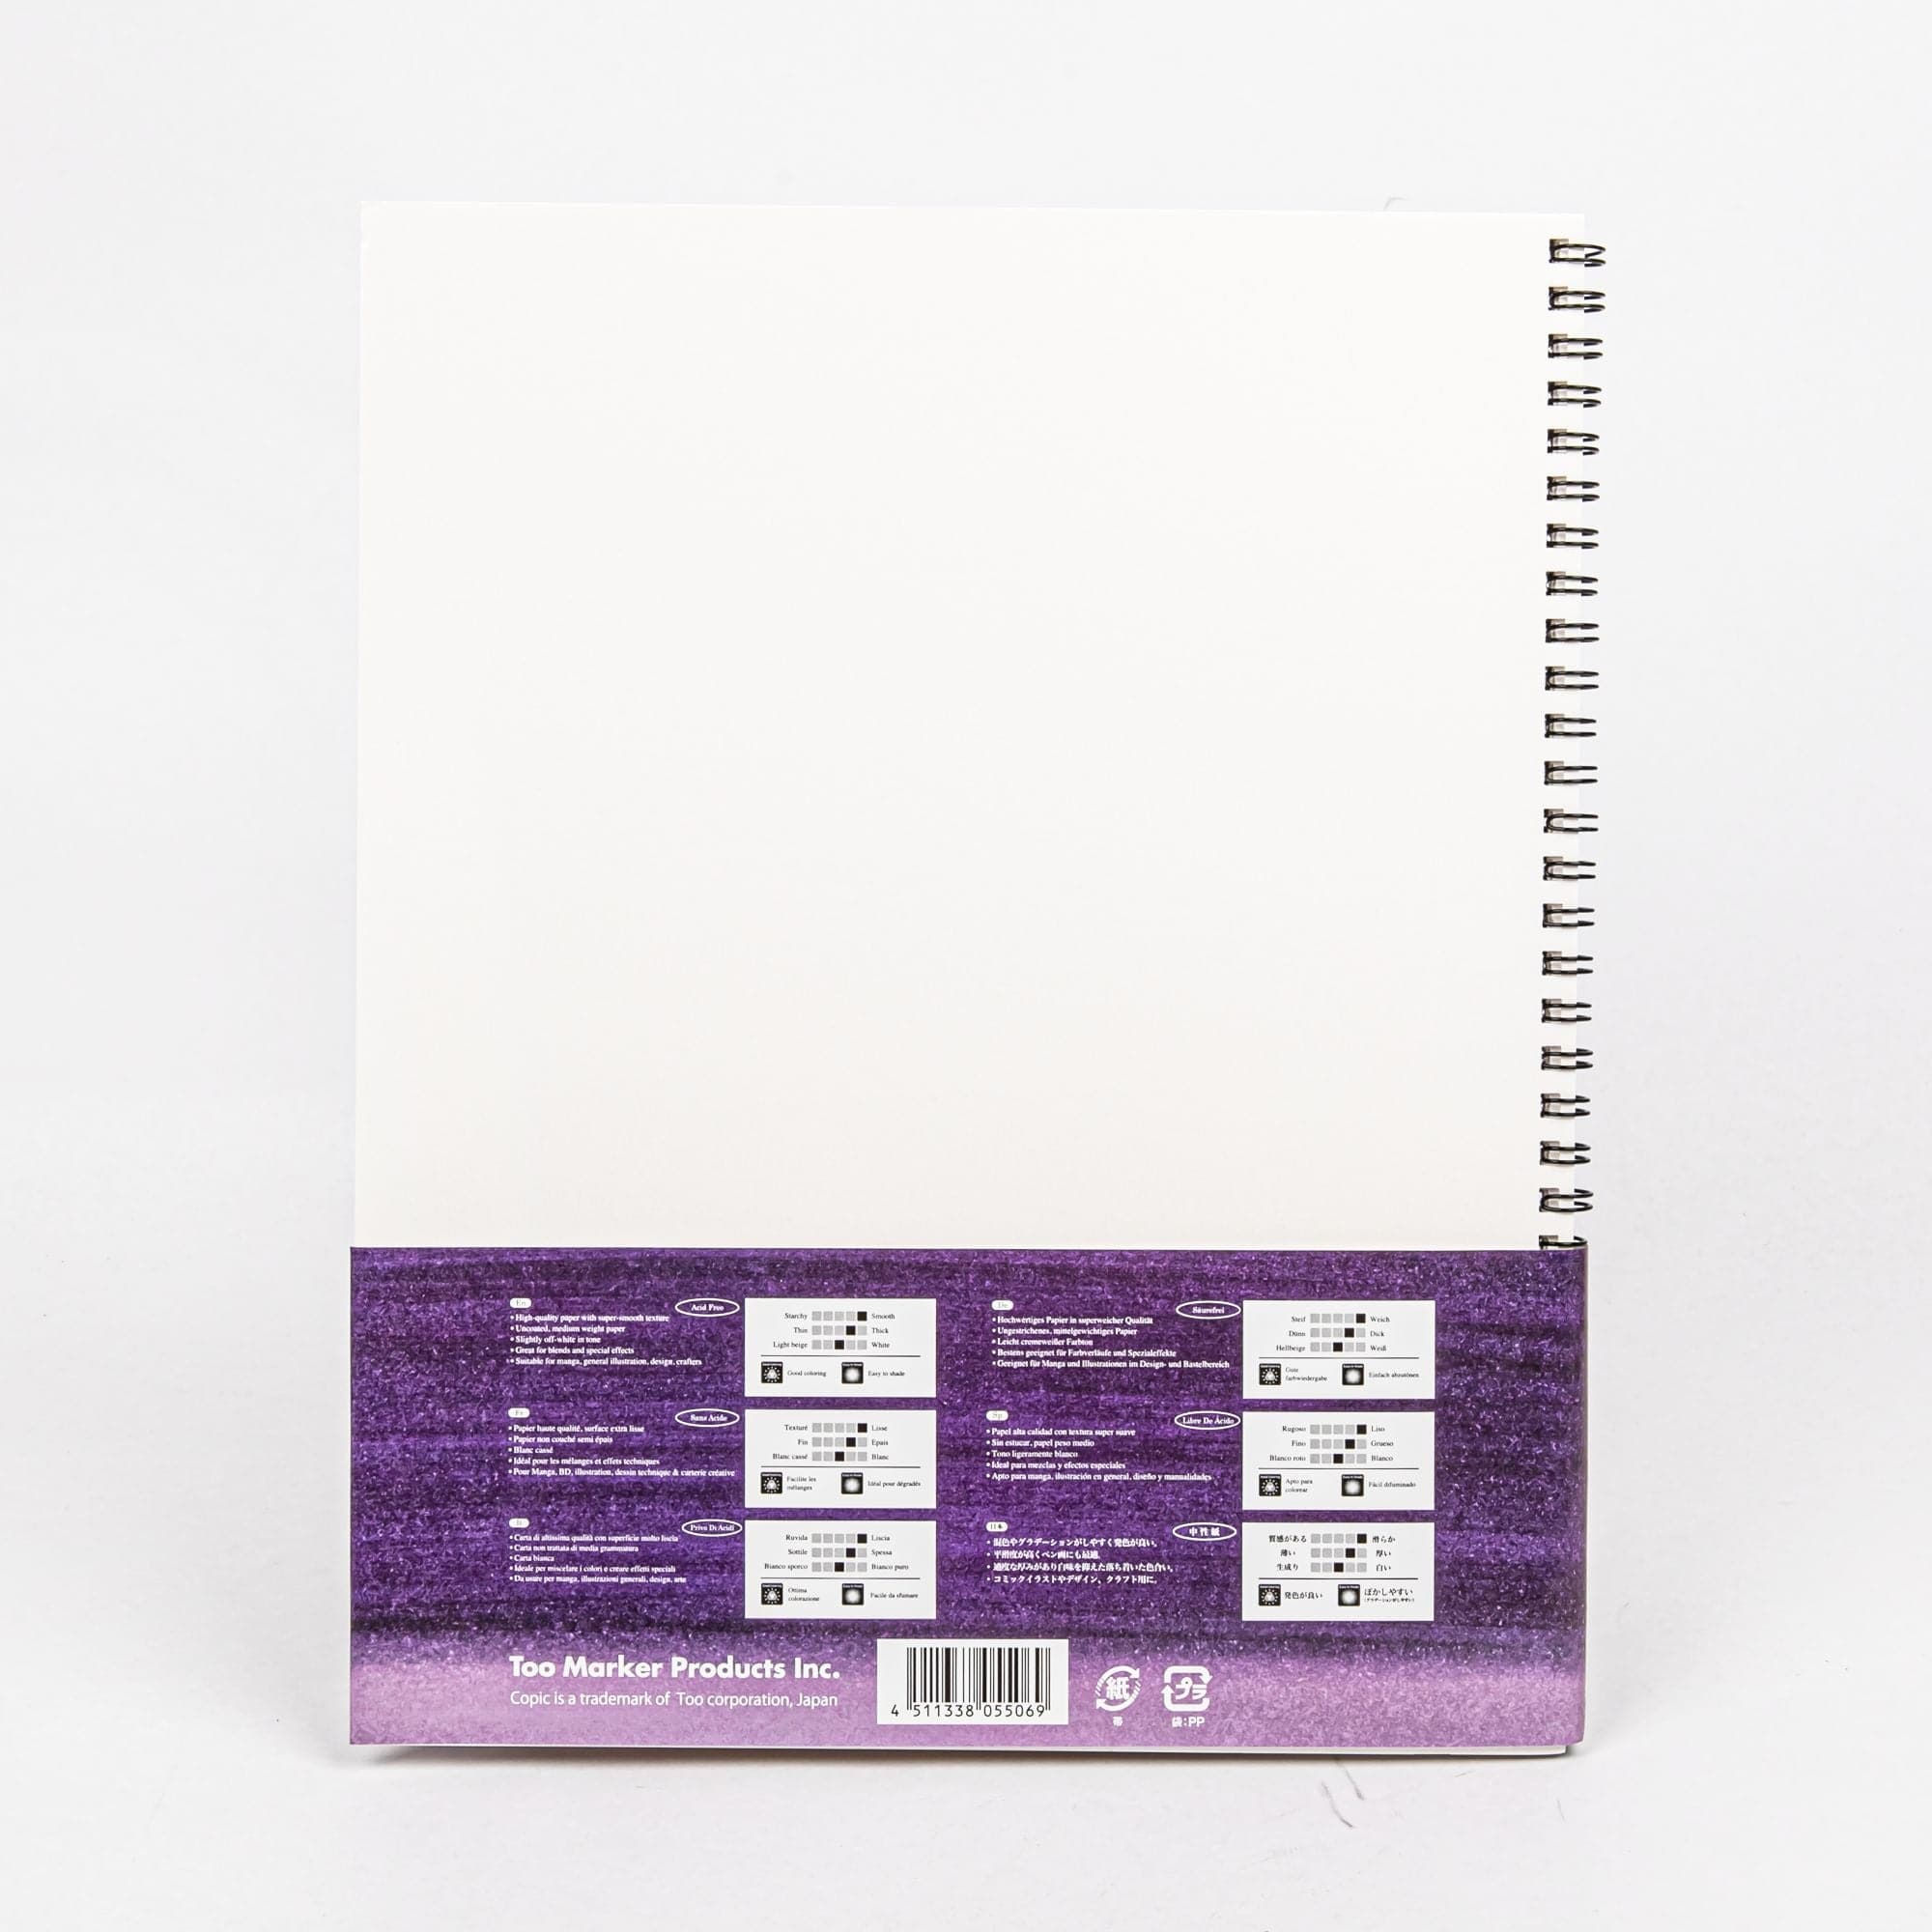 The Copic Sketchbook L size. 240x305mm. 30 Sheets. Spiral Bound